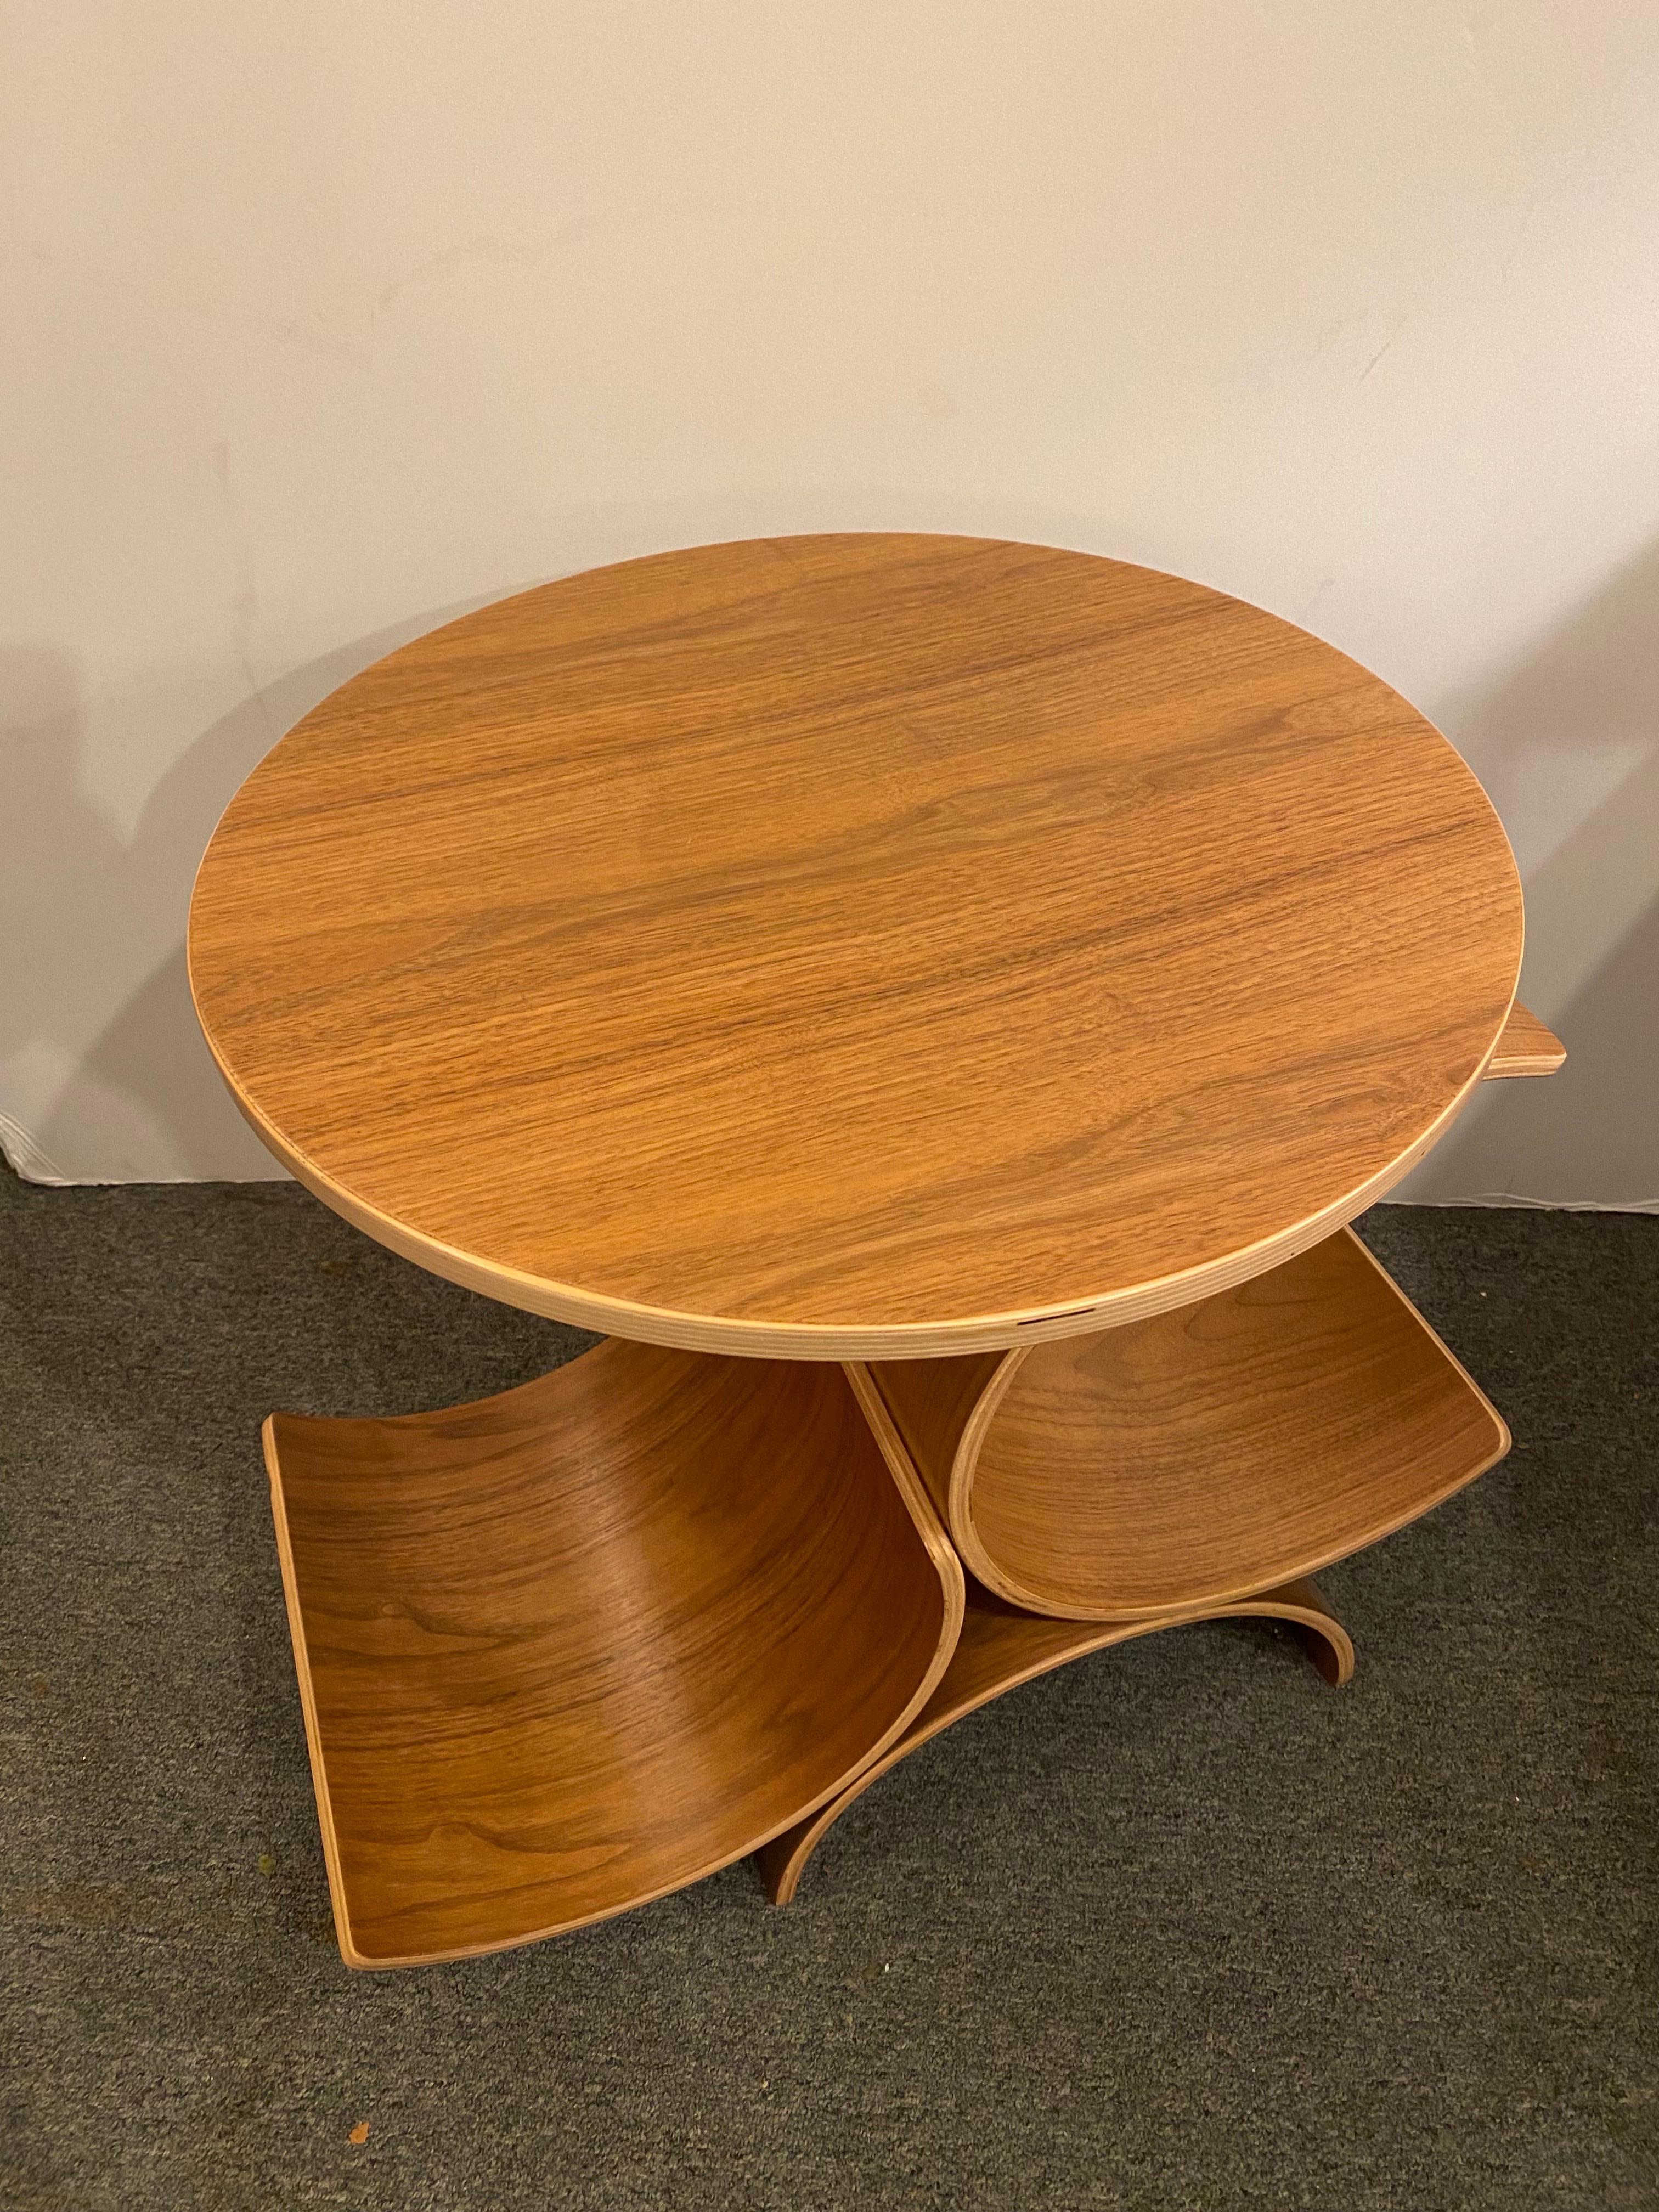 In House Zuckerman/ Lawton Design Molded Plywood Table with Walnut tops.  Curvy Form works as a magazine rack as well as Side Table.  Table dates to the late 90's early 2000's.